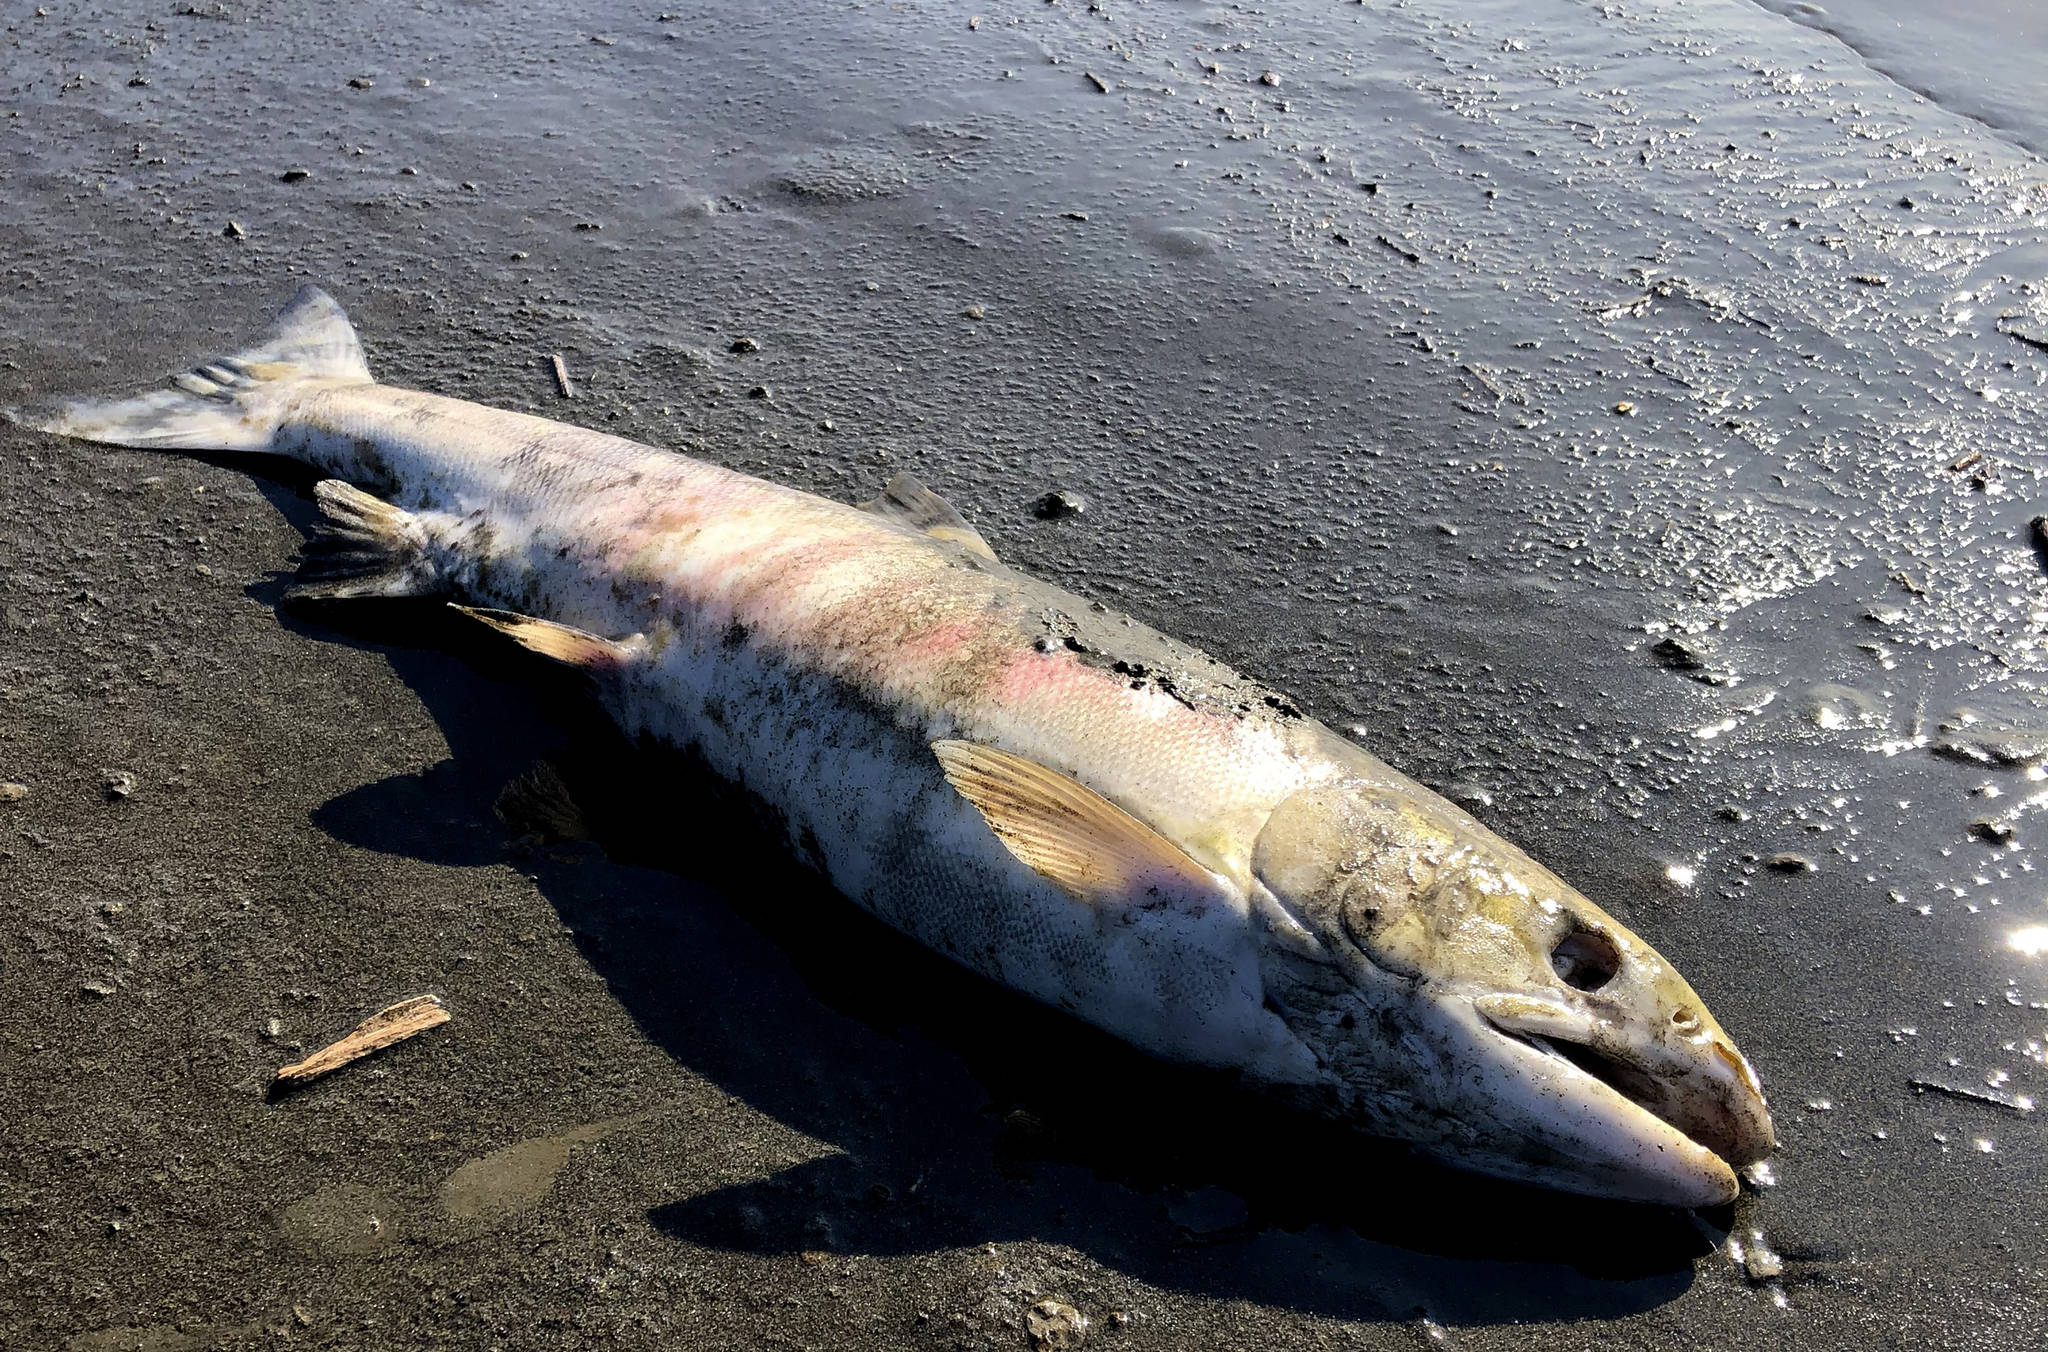 This July 2019 photo provided by Peter Westley shows a carcass of chum salmon lying along the shore of the Koyukuk River near Huslia, Alaska. Alaska scientists and fisheries managers are investigating the deaths of salmon that may be tied to the state’s unusually hot, dry summer. July was the hottest month ever recorded in Alaska. (Peter Westley, University of Alaska Fairbanks via AP)